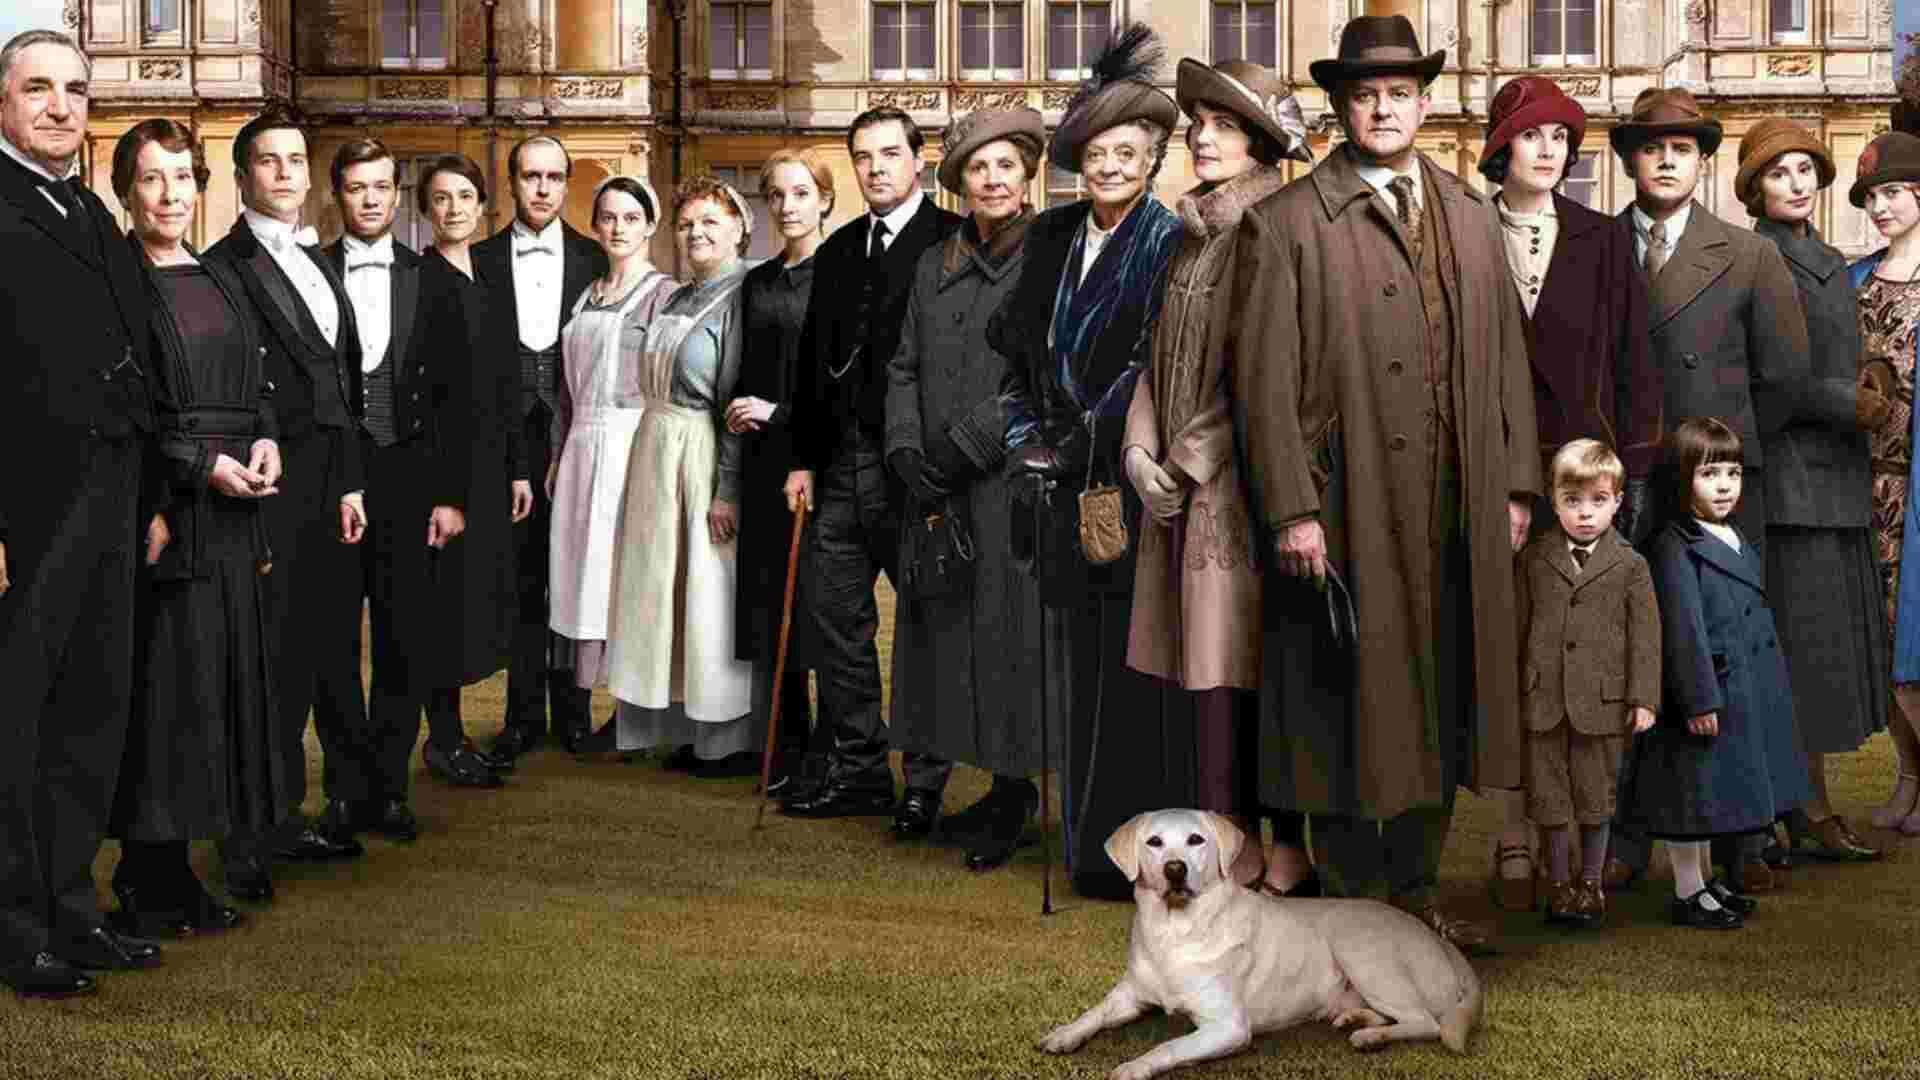 Downton Abbey 3 To Be Released In September 2025